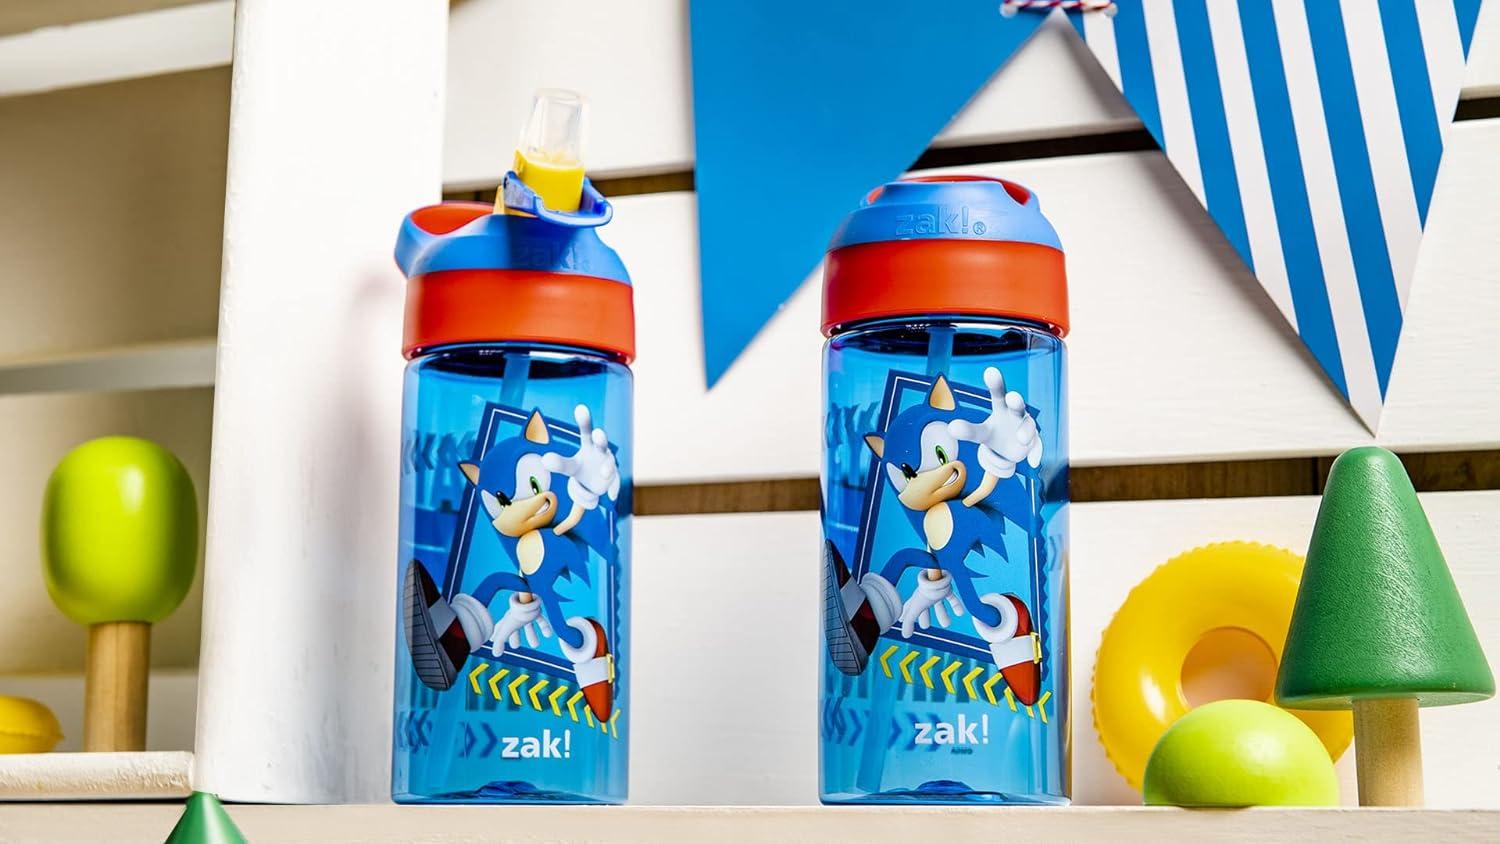 Zak Designs CoComelon Kids Water Bottle with Spout Cover and Built